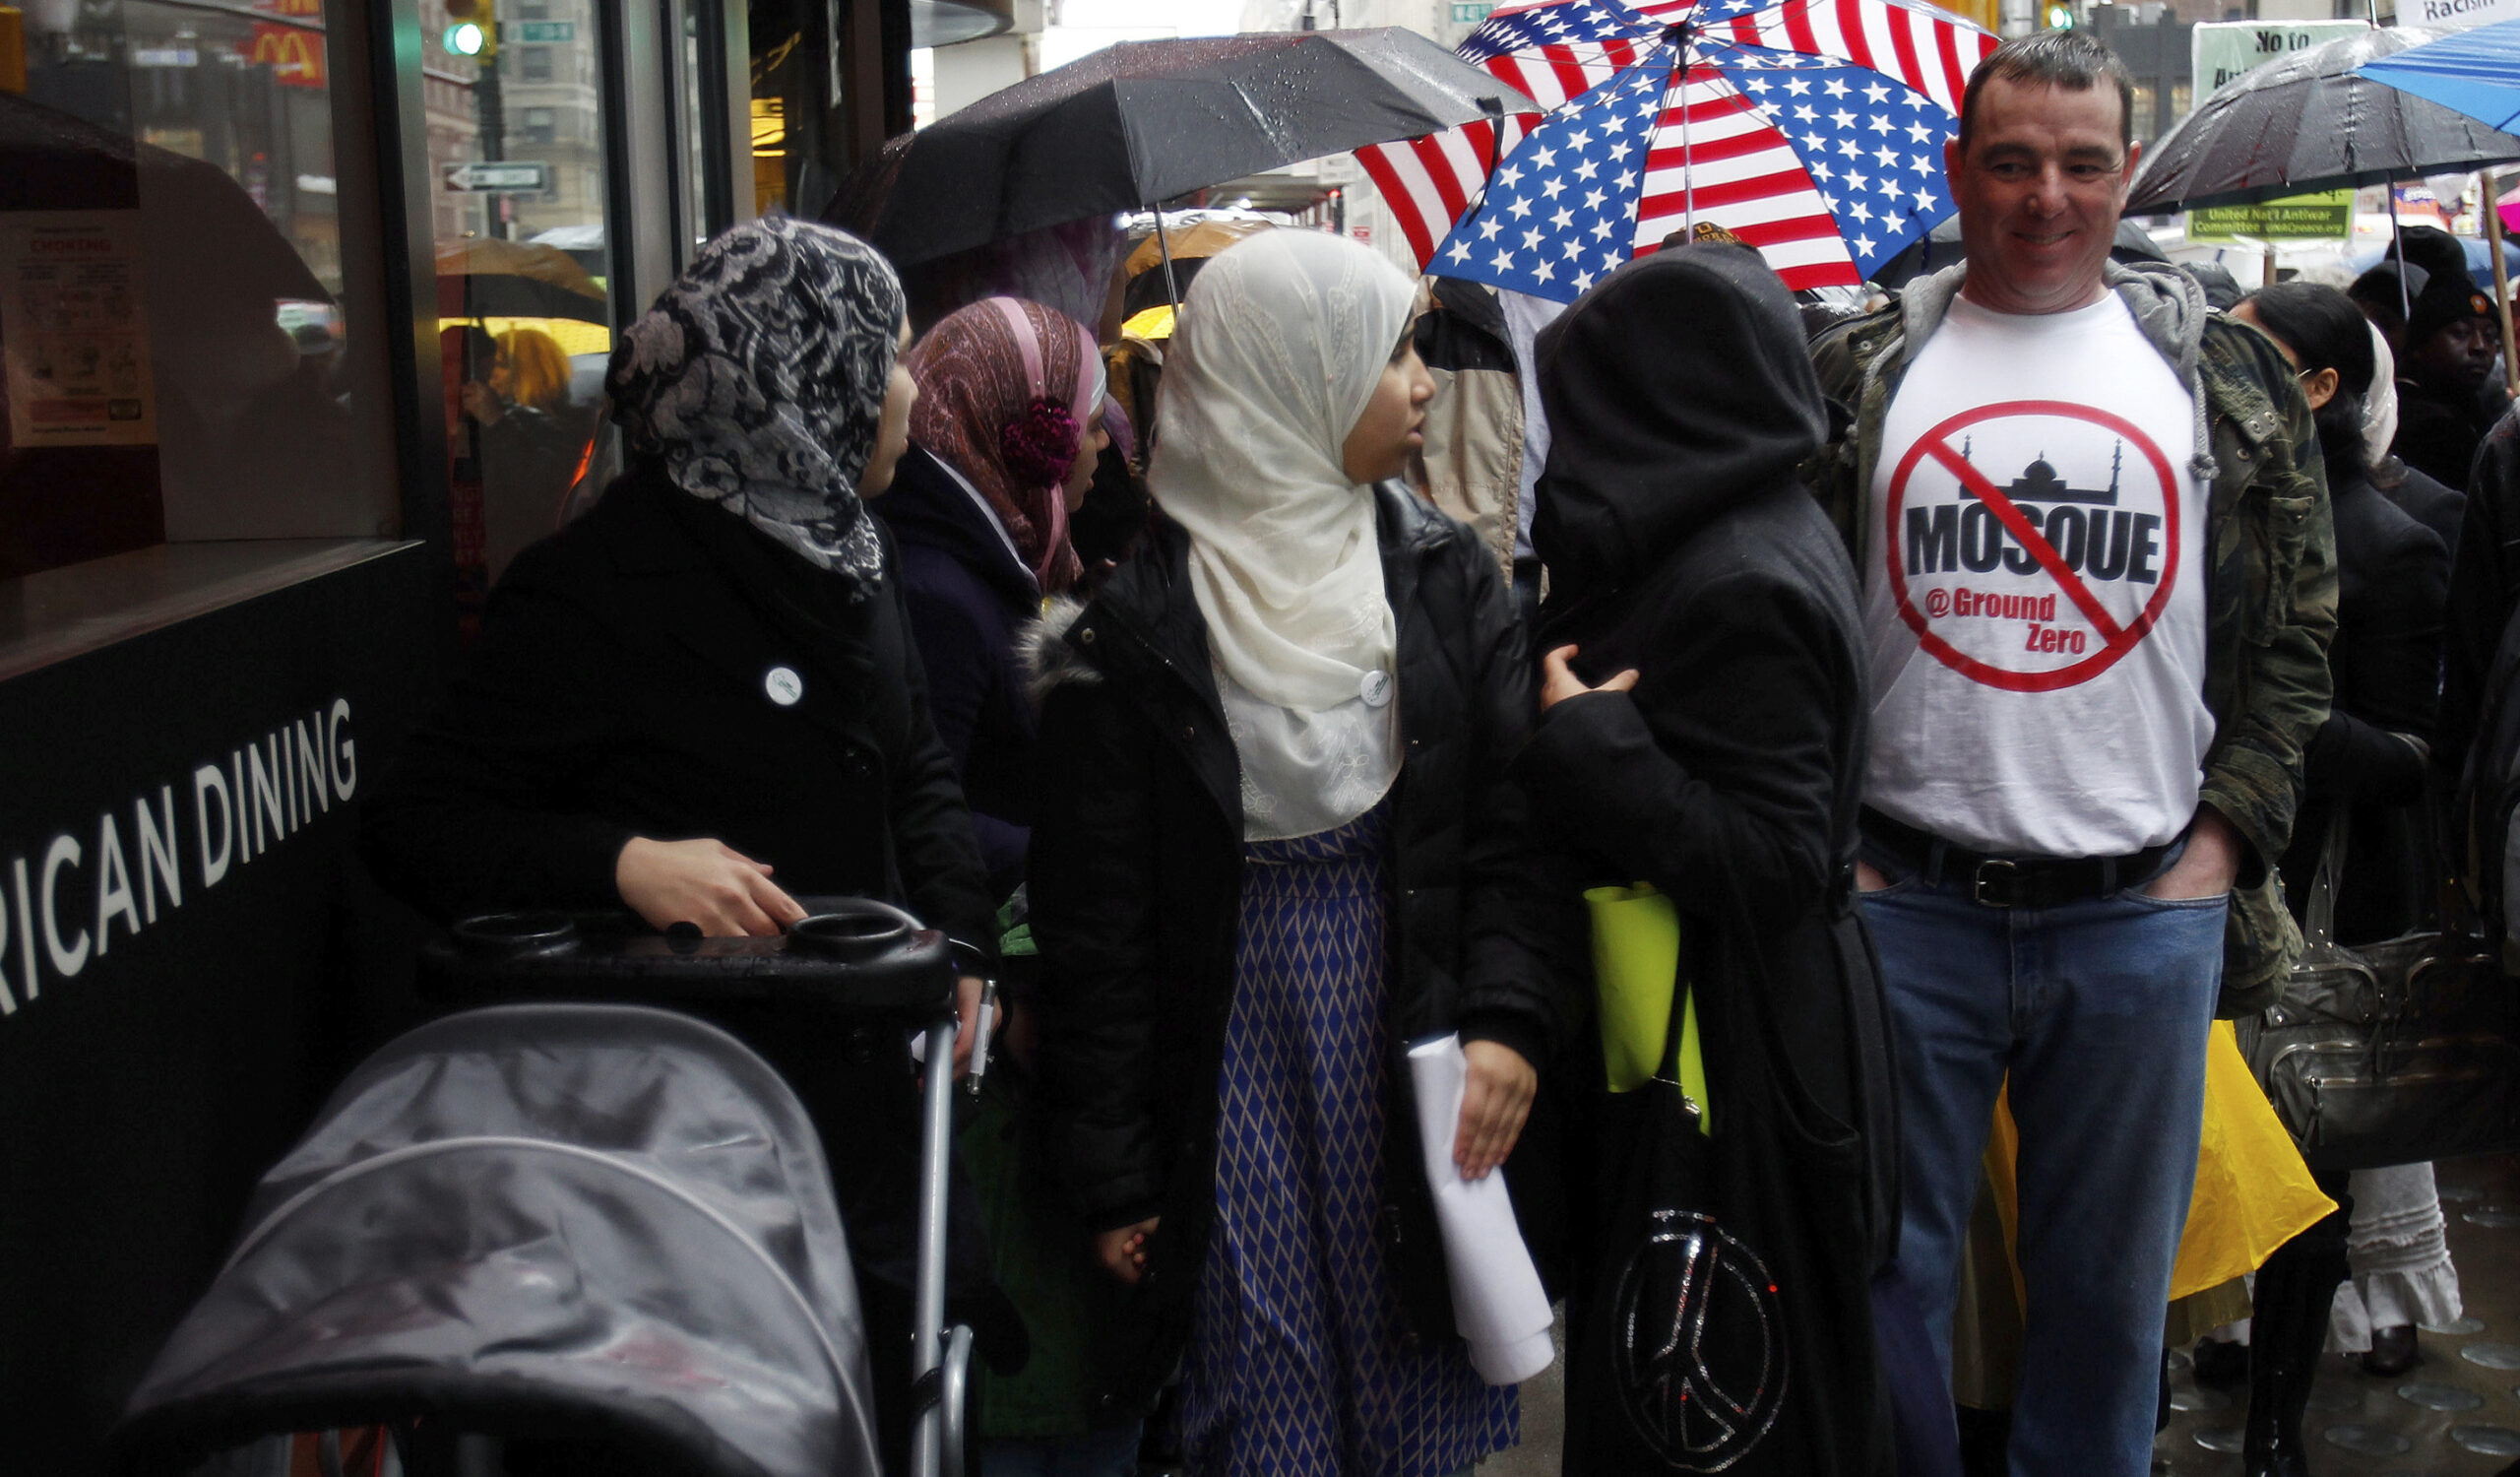 Muslim women look at a man in a T-shirt showing his opposition to proposal of building a mosque near World Trade Center site, near the "Today, I Am A Muslim, Too" rally in New York City